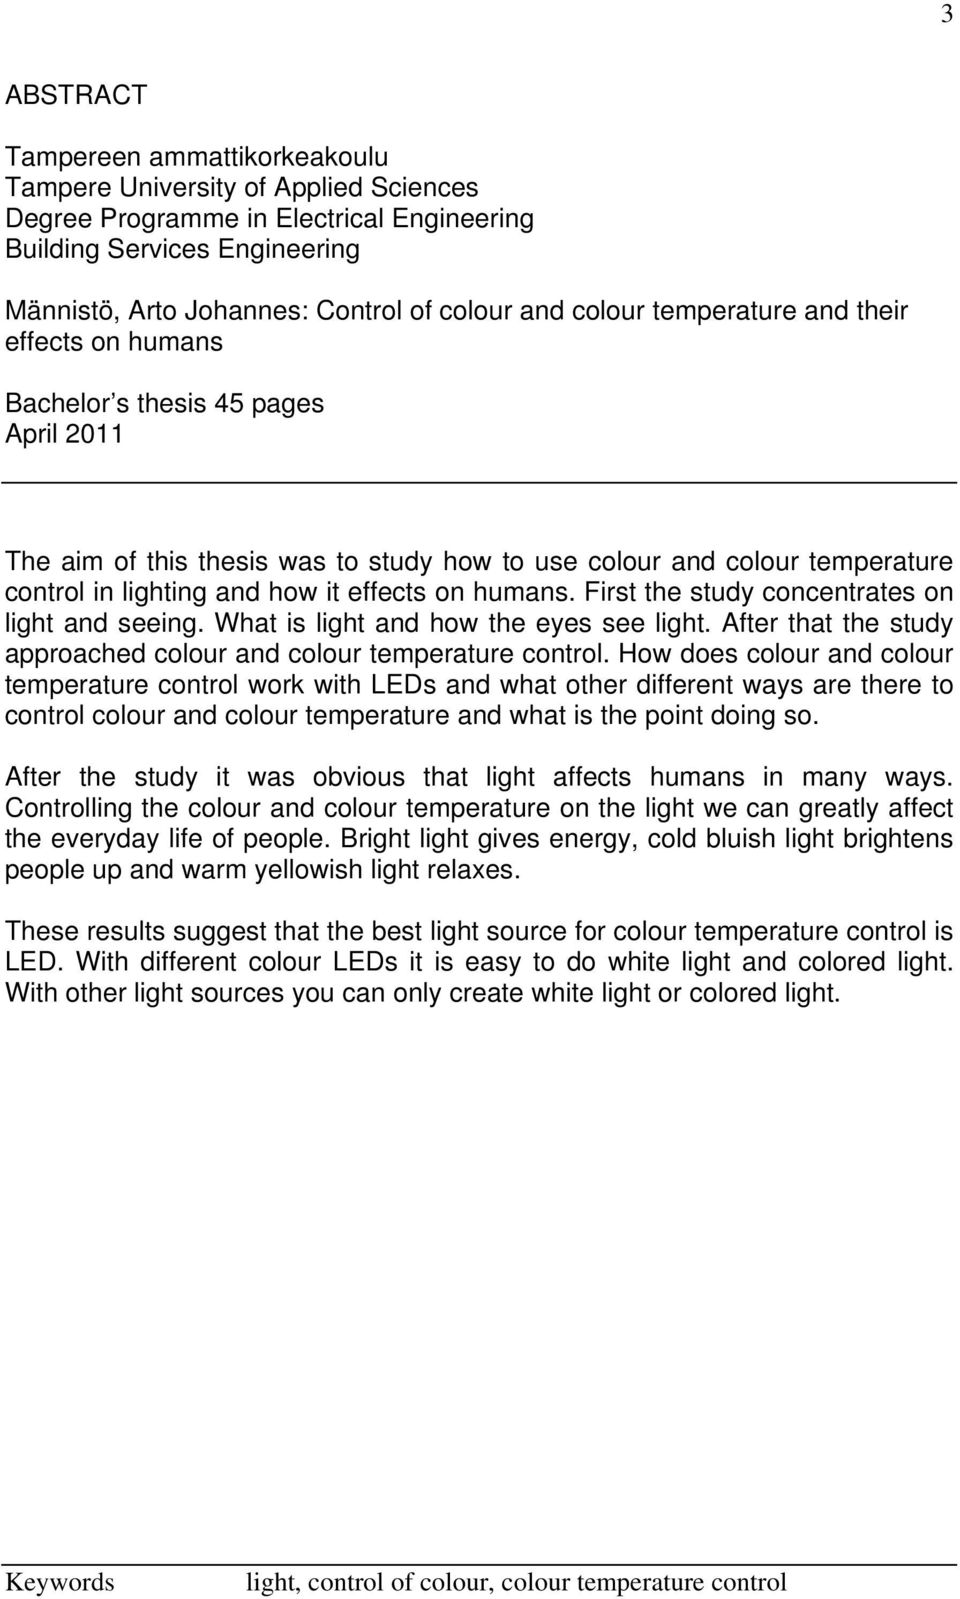 effects on humans. First the study concentrates on light and seeing. What is light and how the eyes see light. After that the study approached colour and colour temperature control.